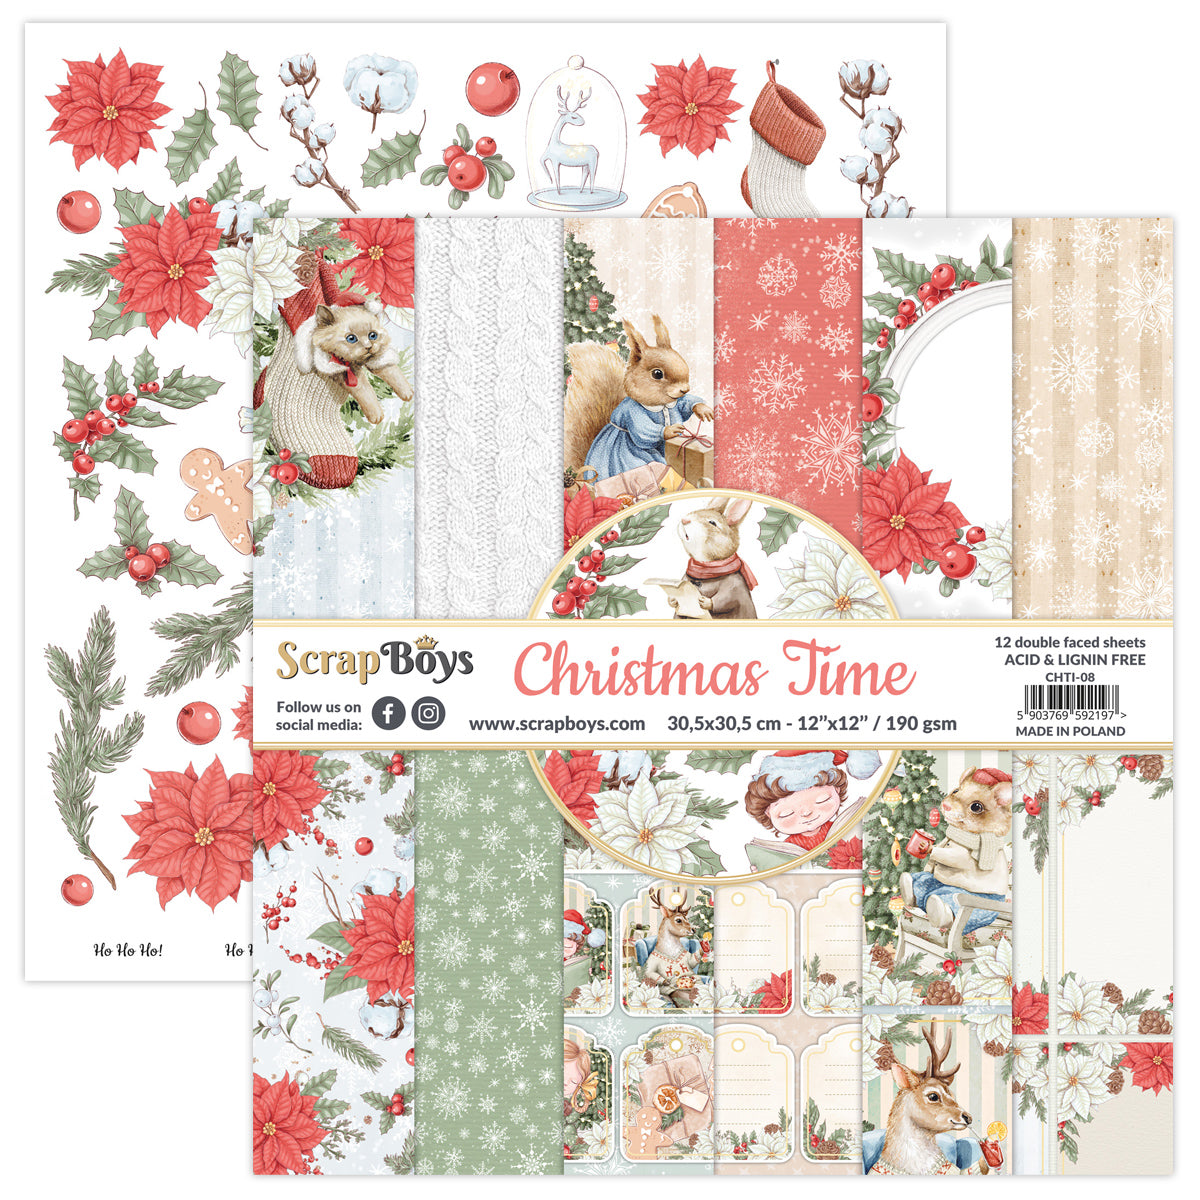 Christmas Time, scrapboys, 12 double sided 12x12, scrapbooking